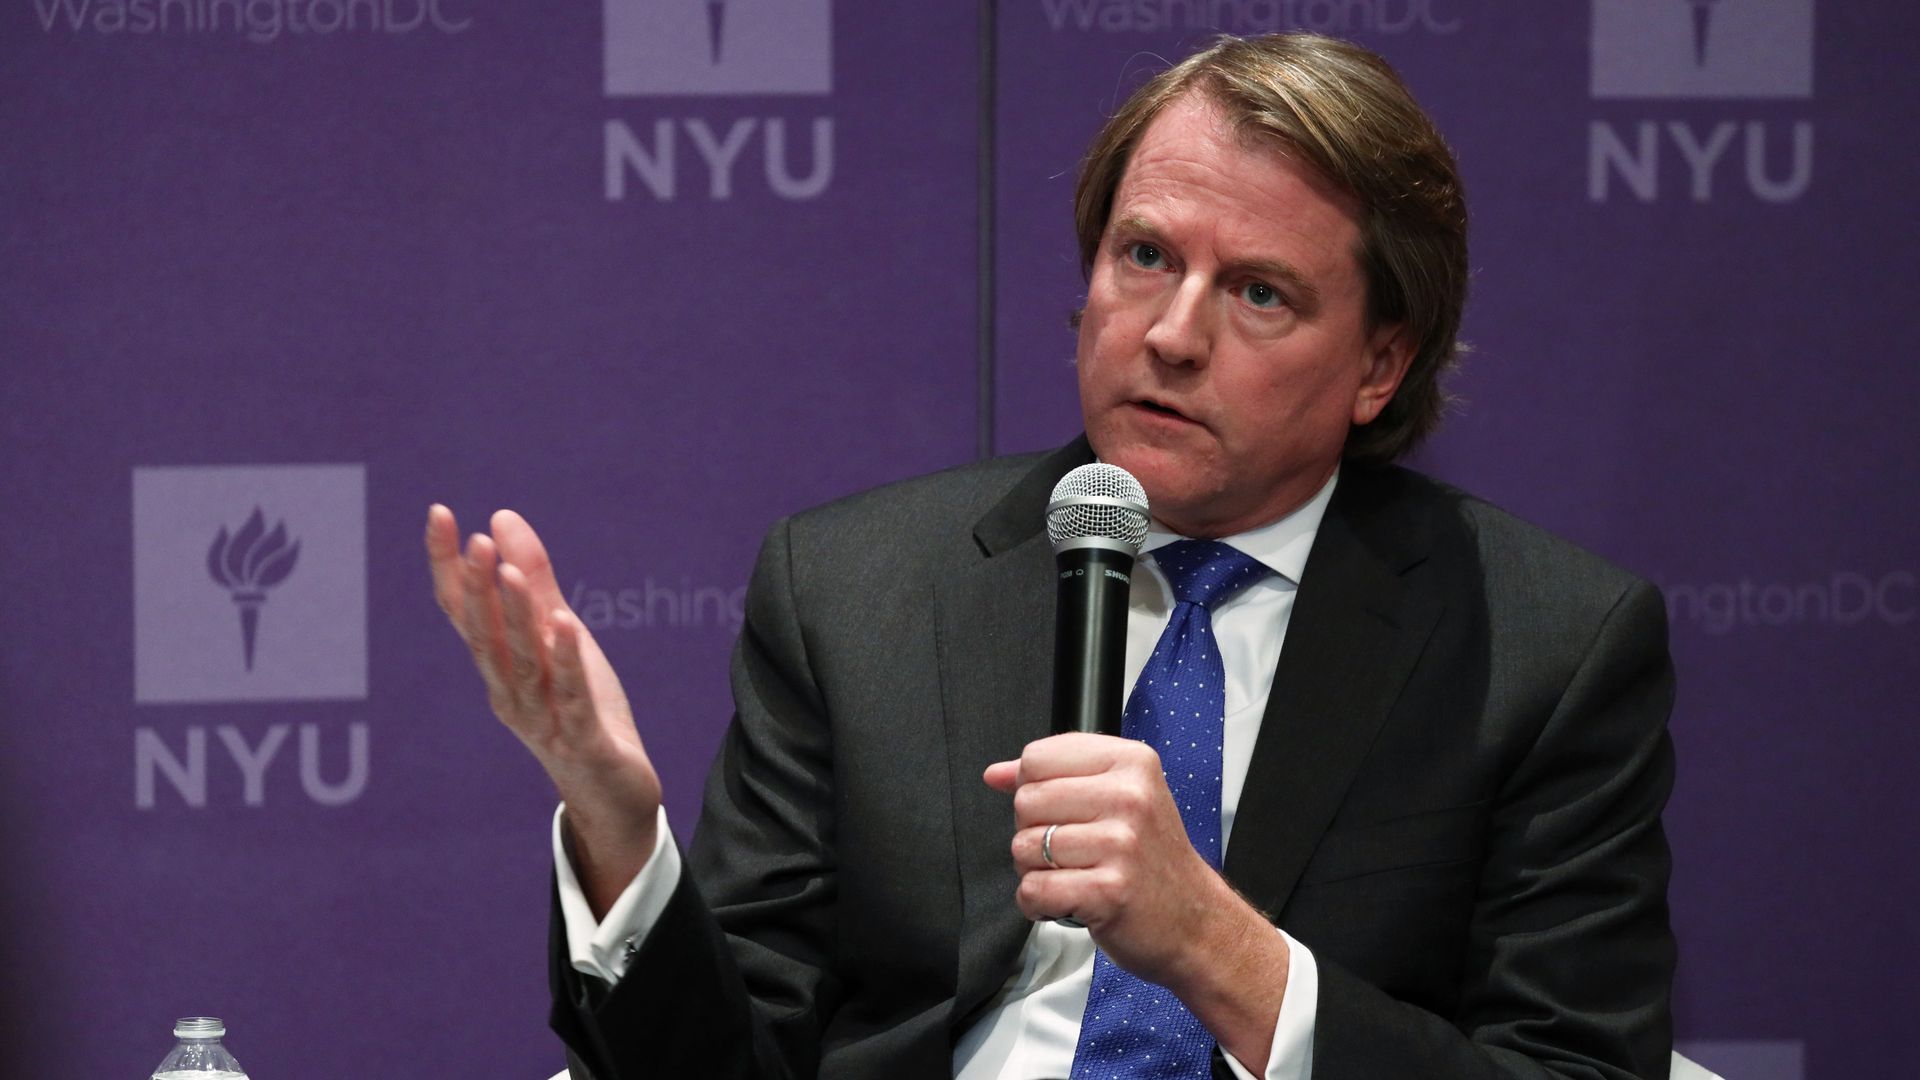 Former White House counsel Don McGahn during a discussion on December 12, 2019 at the NYU Global Academic Center in Washington, DC. 